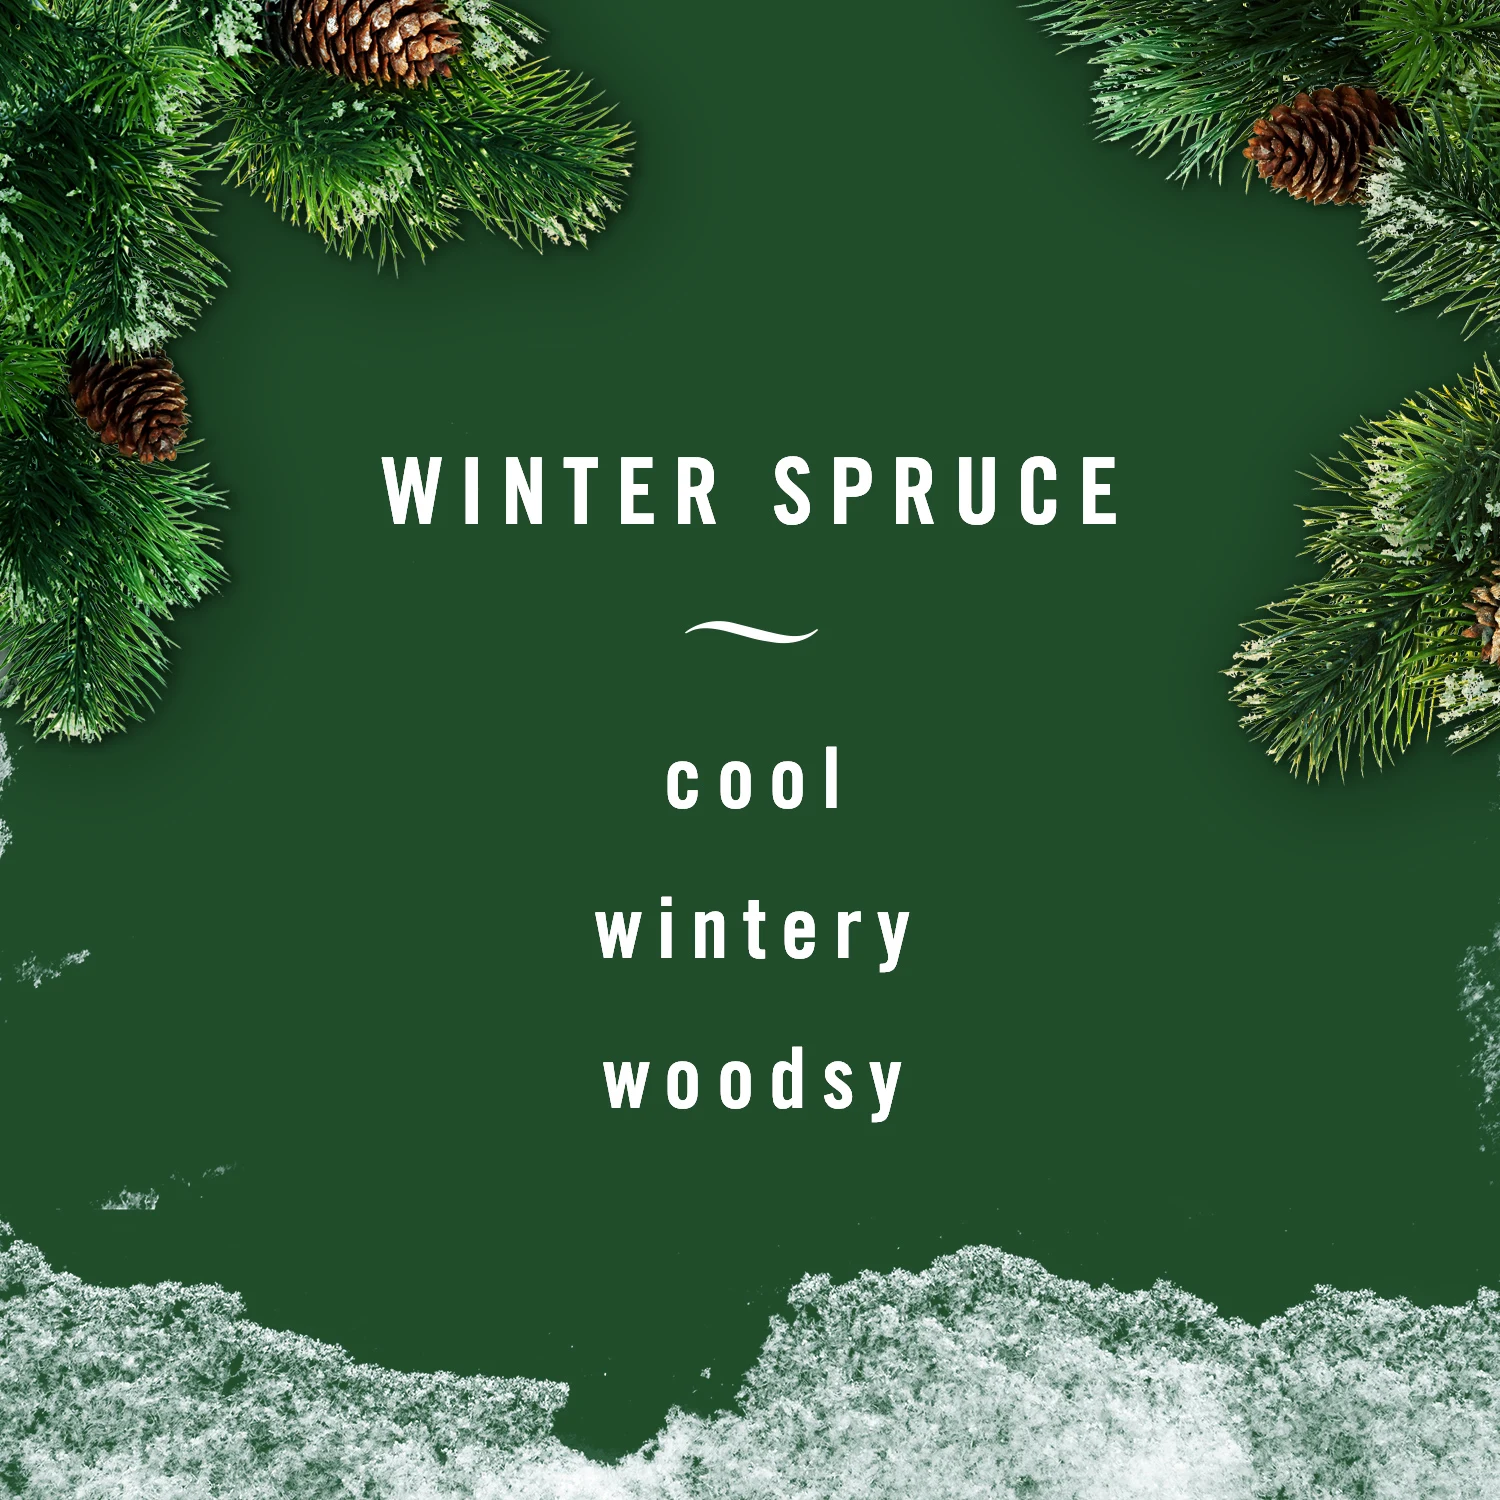 Winter Spruce - cool, wintery, woodsy